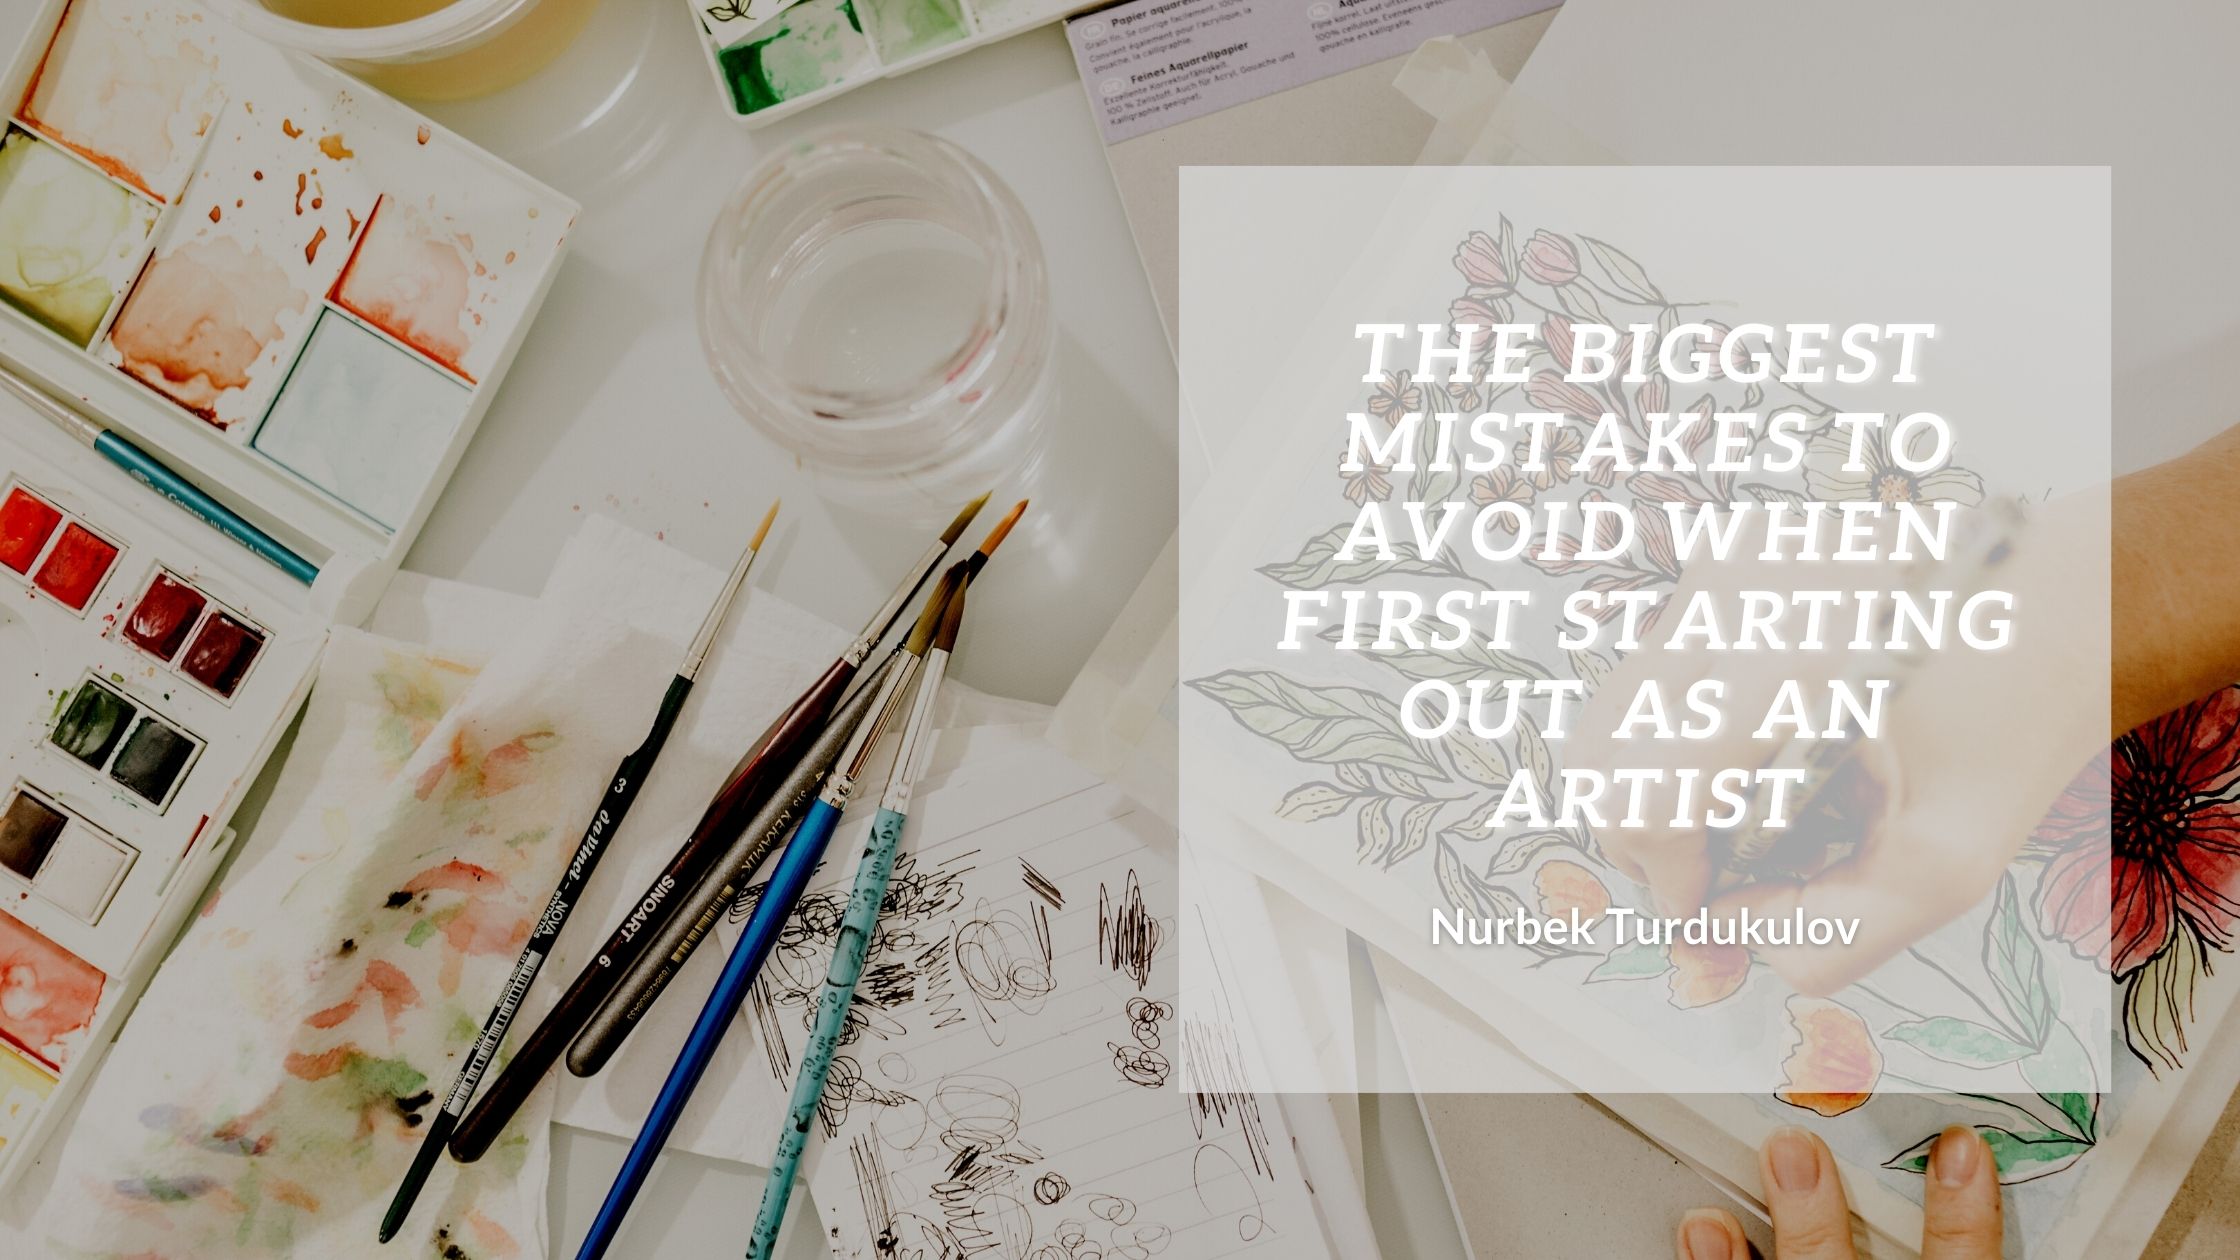 The Biggest Mistakes To Avoid When First Starting Out As An Artist